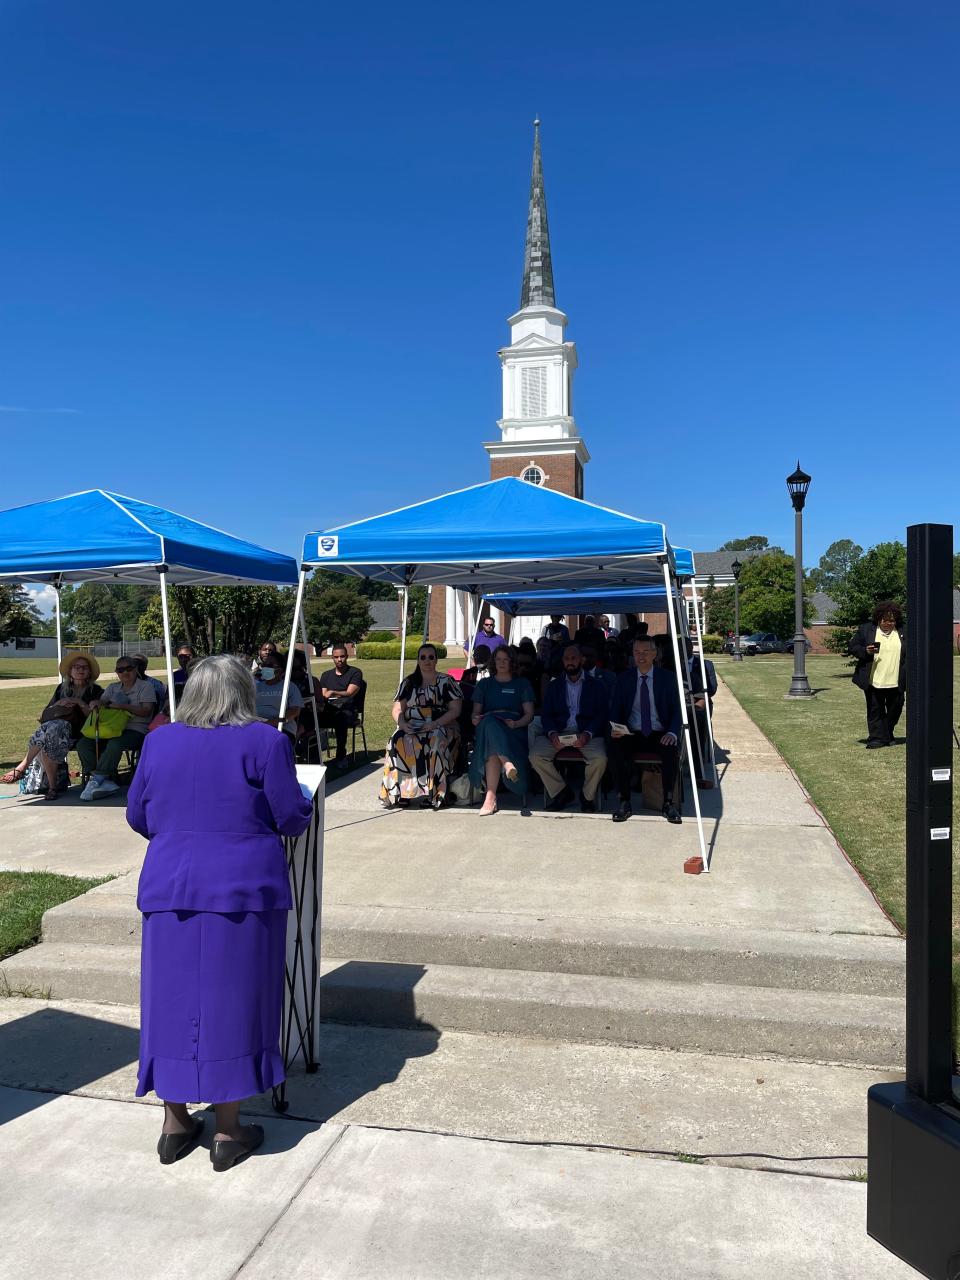 Paine College President Dr. Cheryl Evans Jones addresses guests Thursday, May 2, in dedicating a state historical marker honoring John Wesley Gilbert, the first acknowledged Black archaeologist. Paine's Gilbert-Lambuth Chapel, sharing his name, stands in the background.